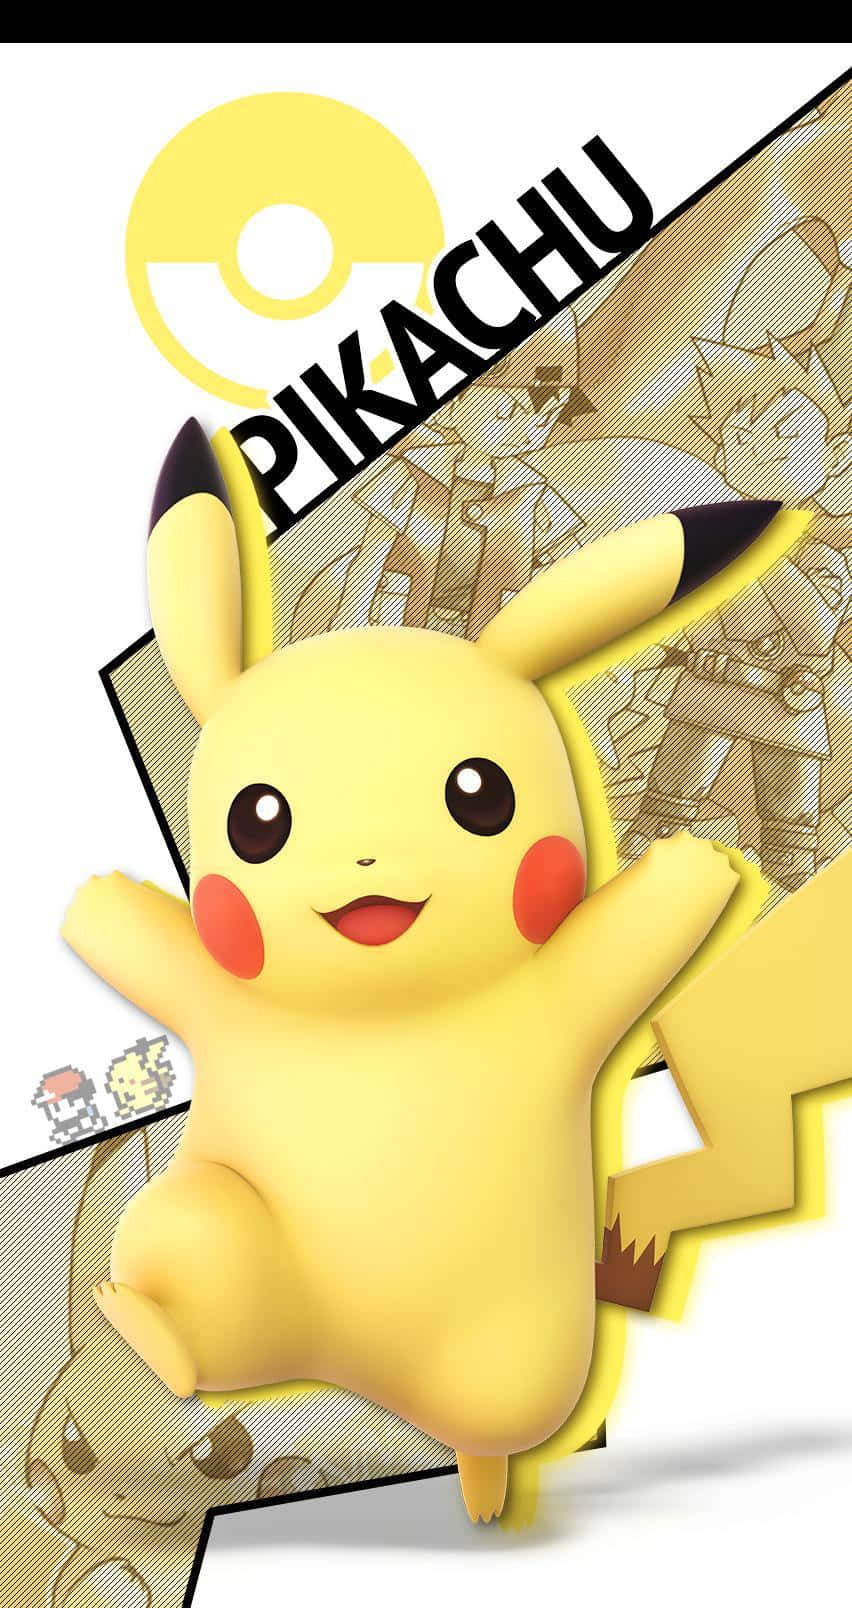 Pikachu Is Shown In The Background